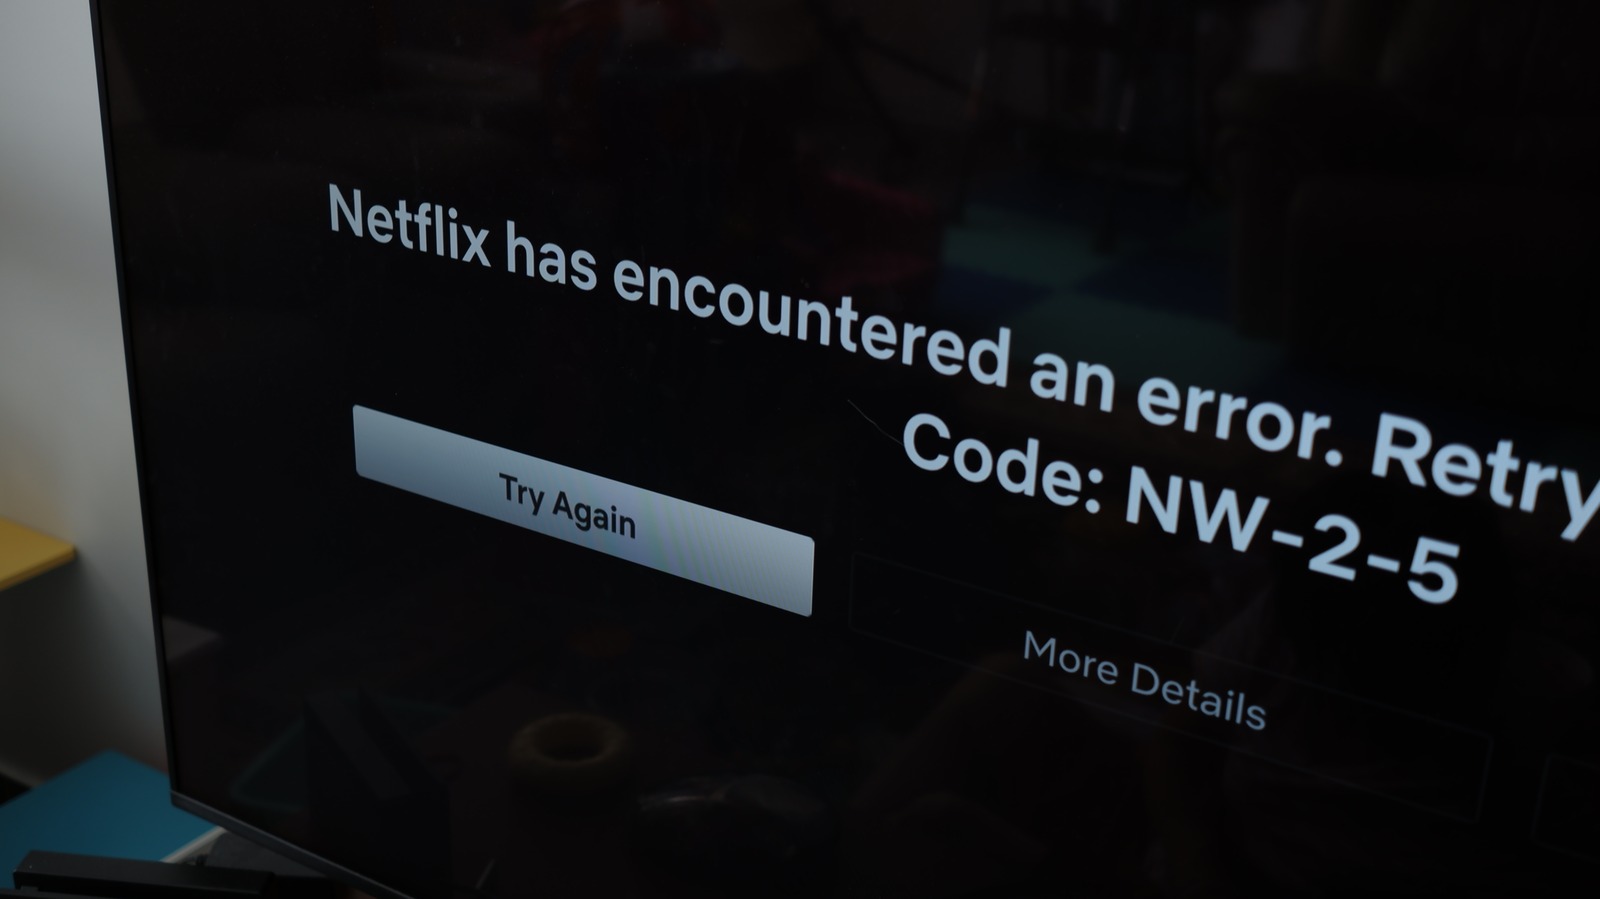 How to Fix Netflix Error Code NW-2-5 on Any Devices?